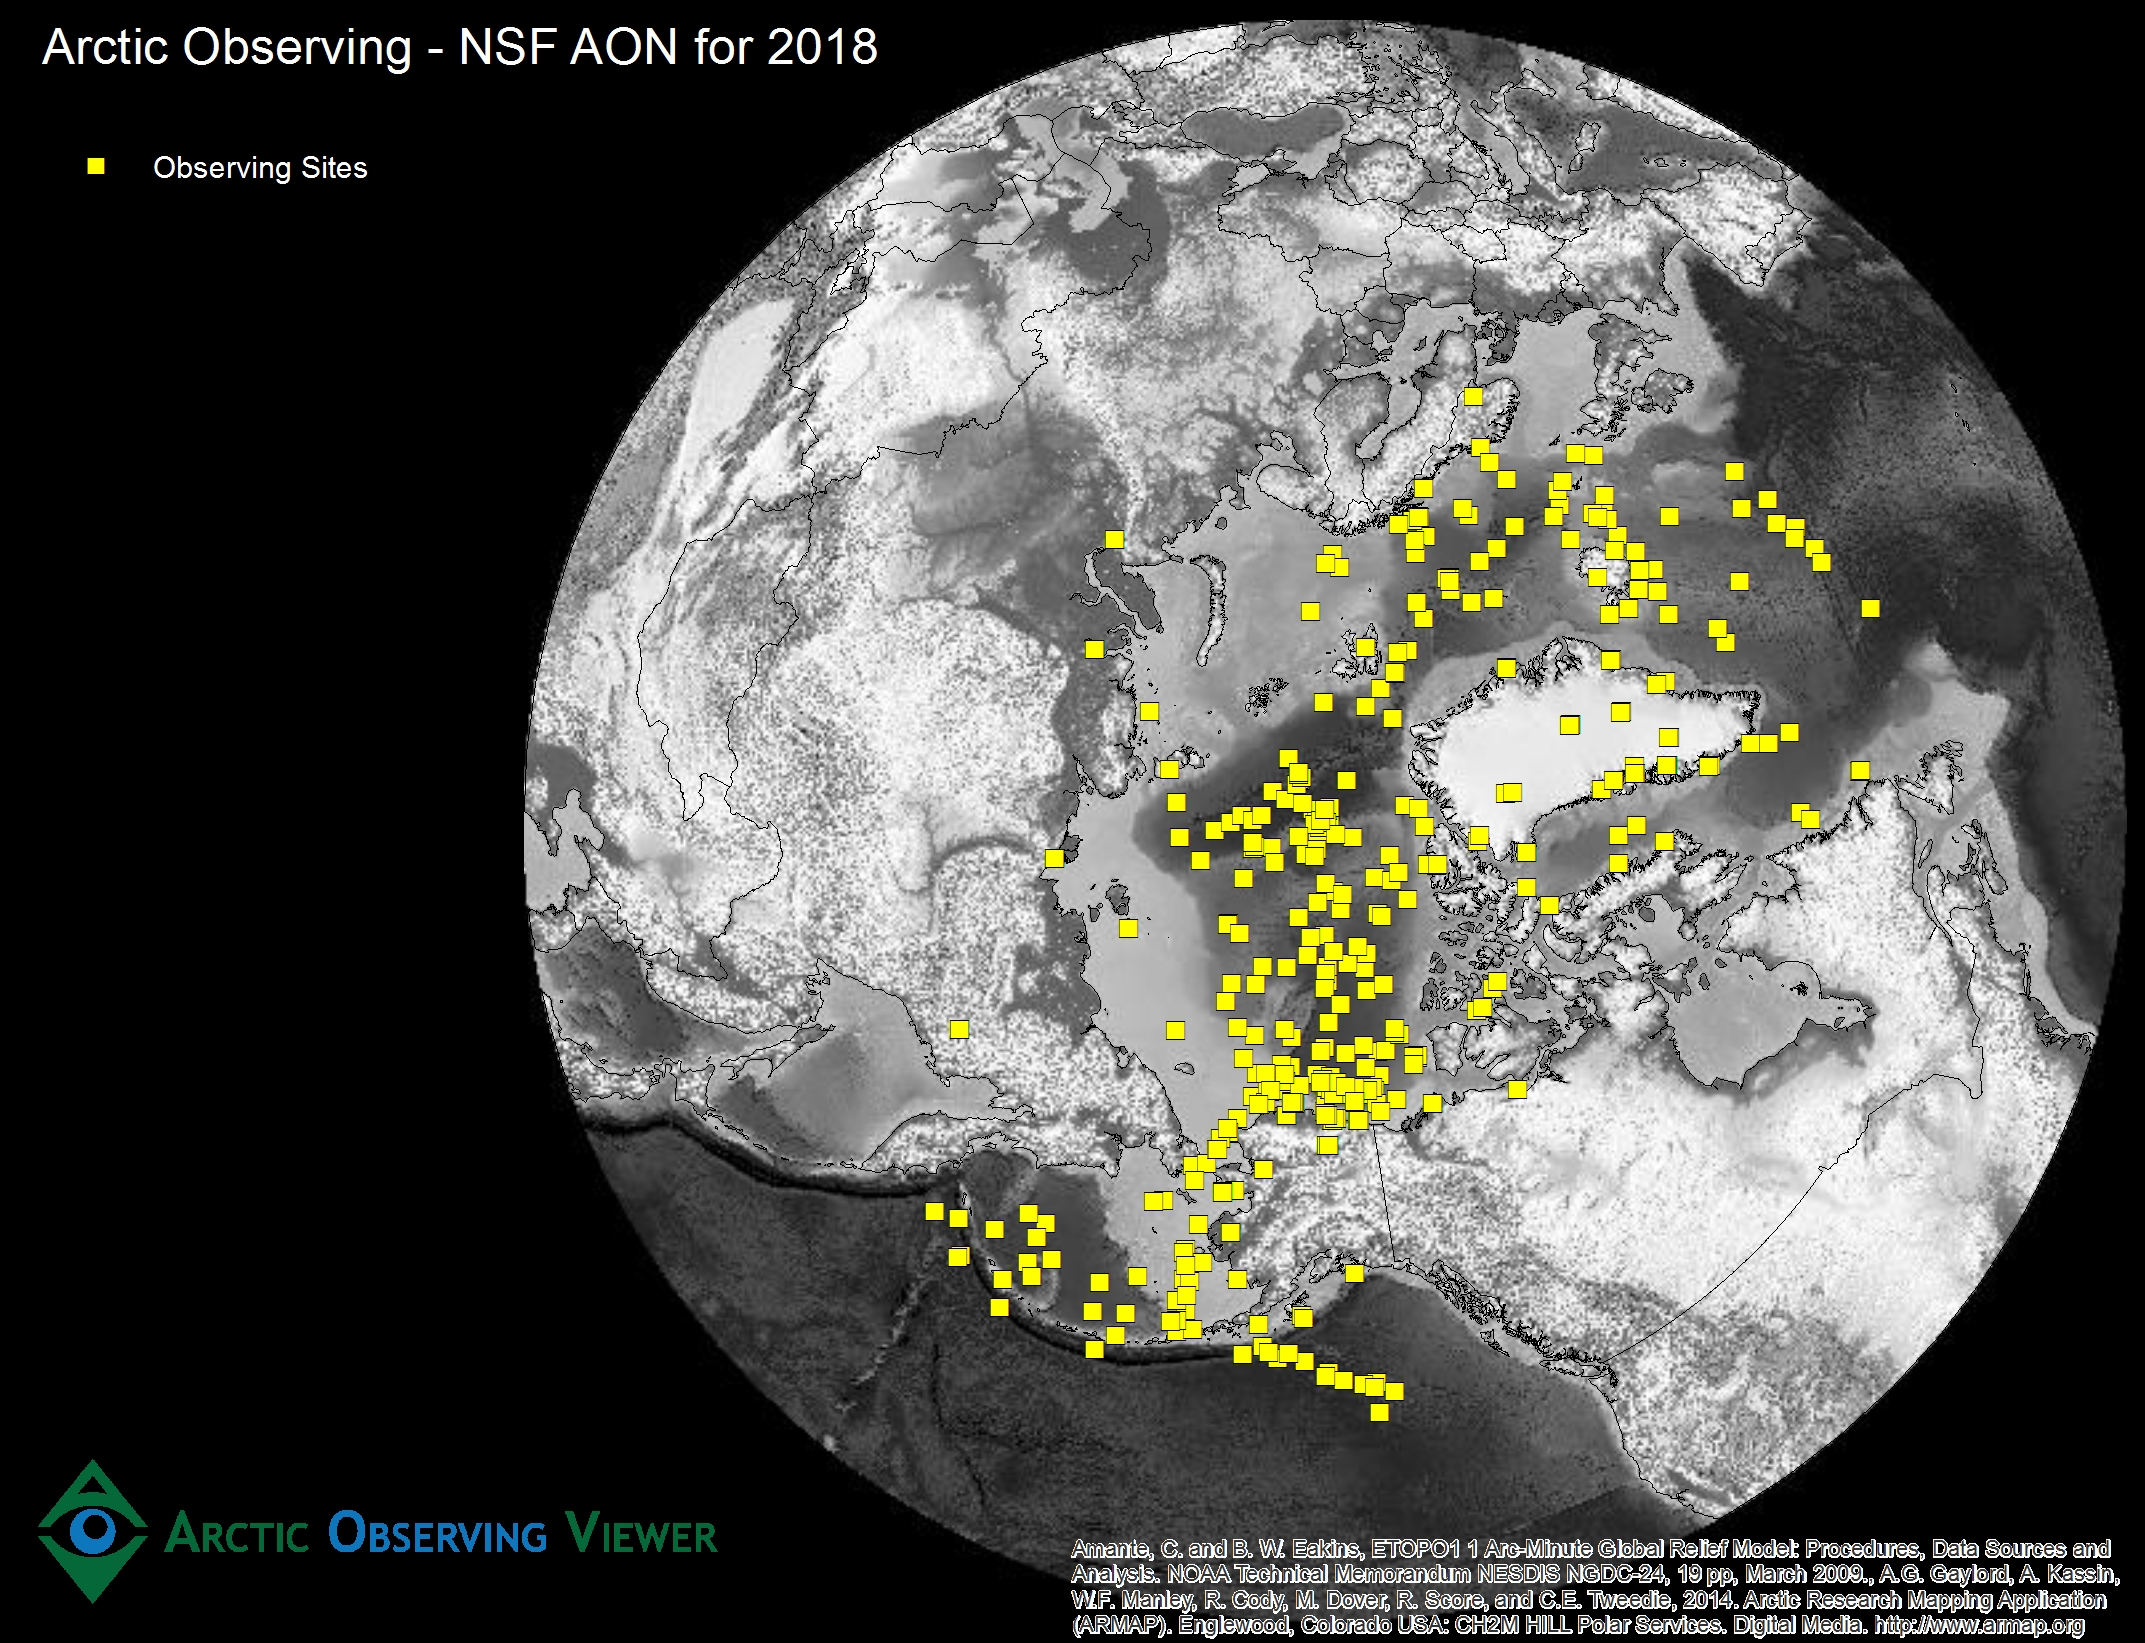 Arctic Observing - NSF AON for 2018